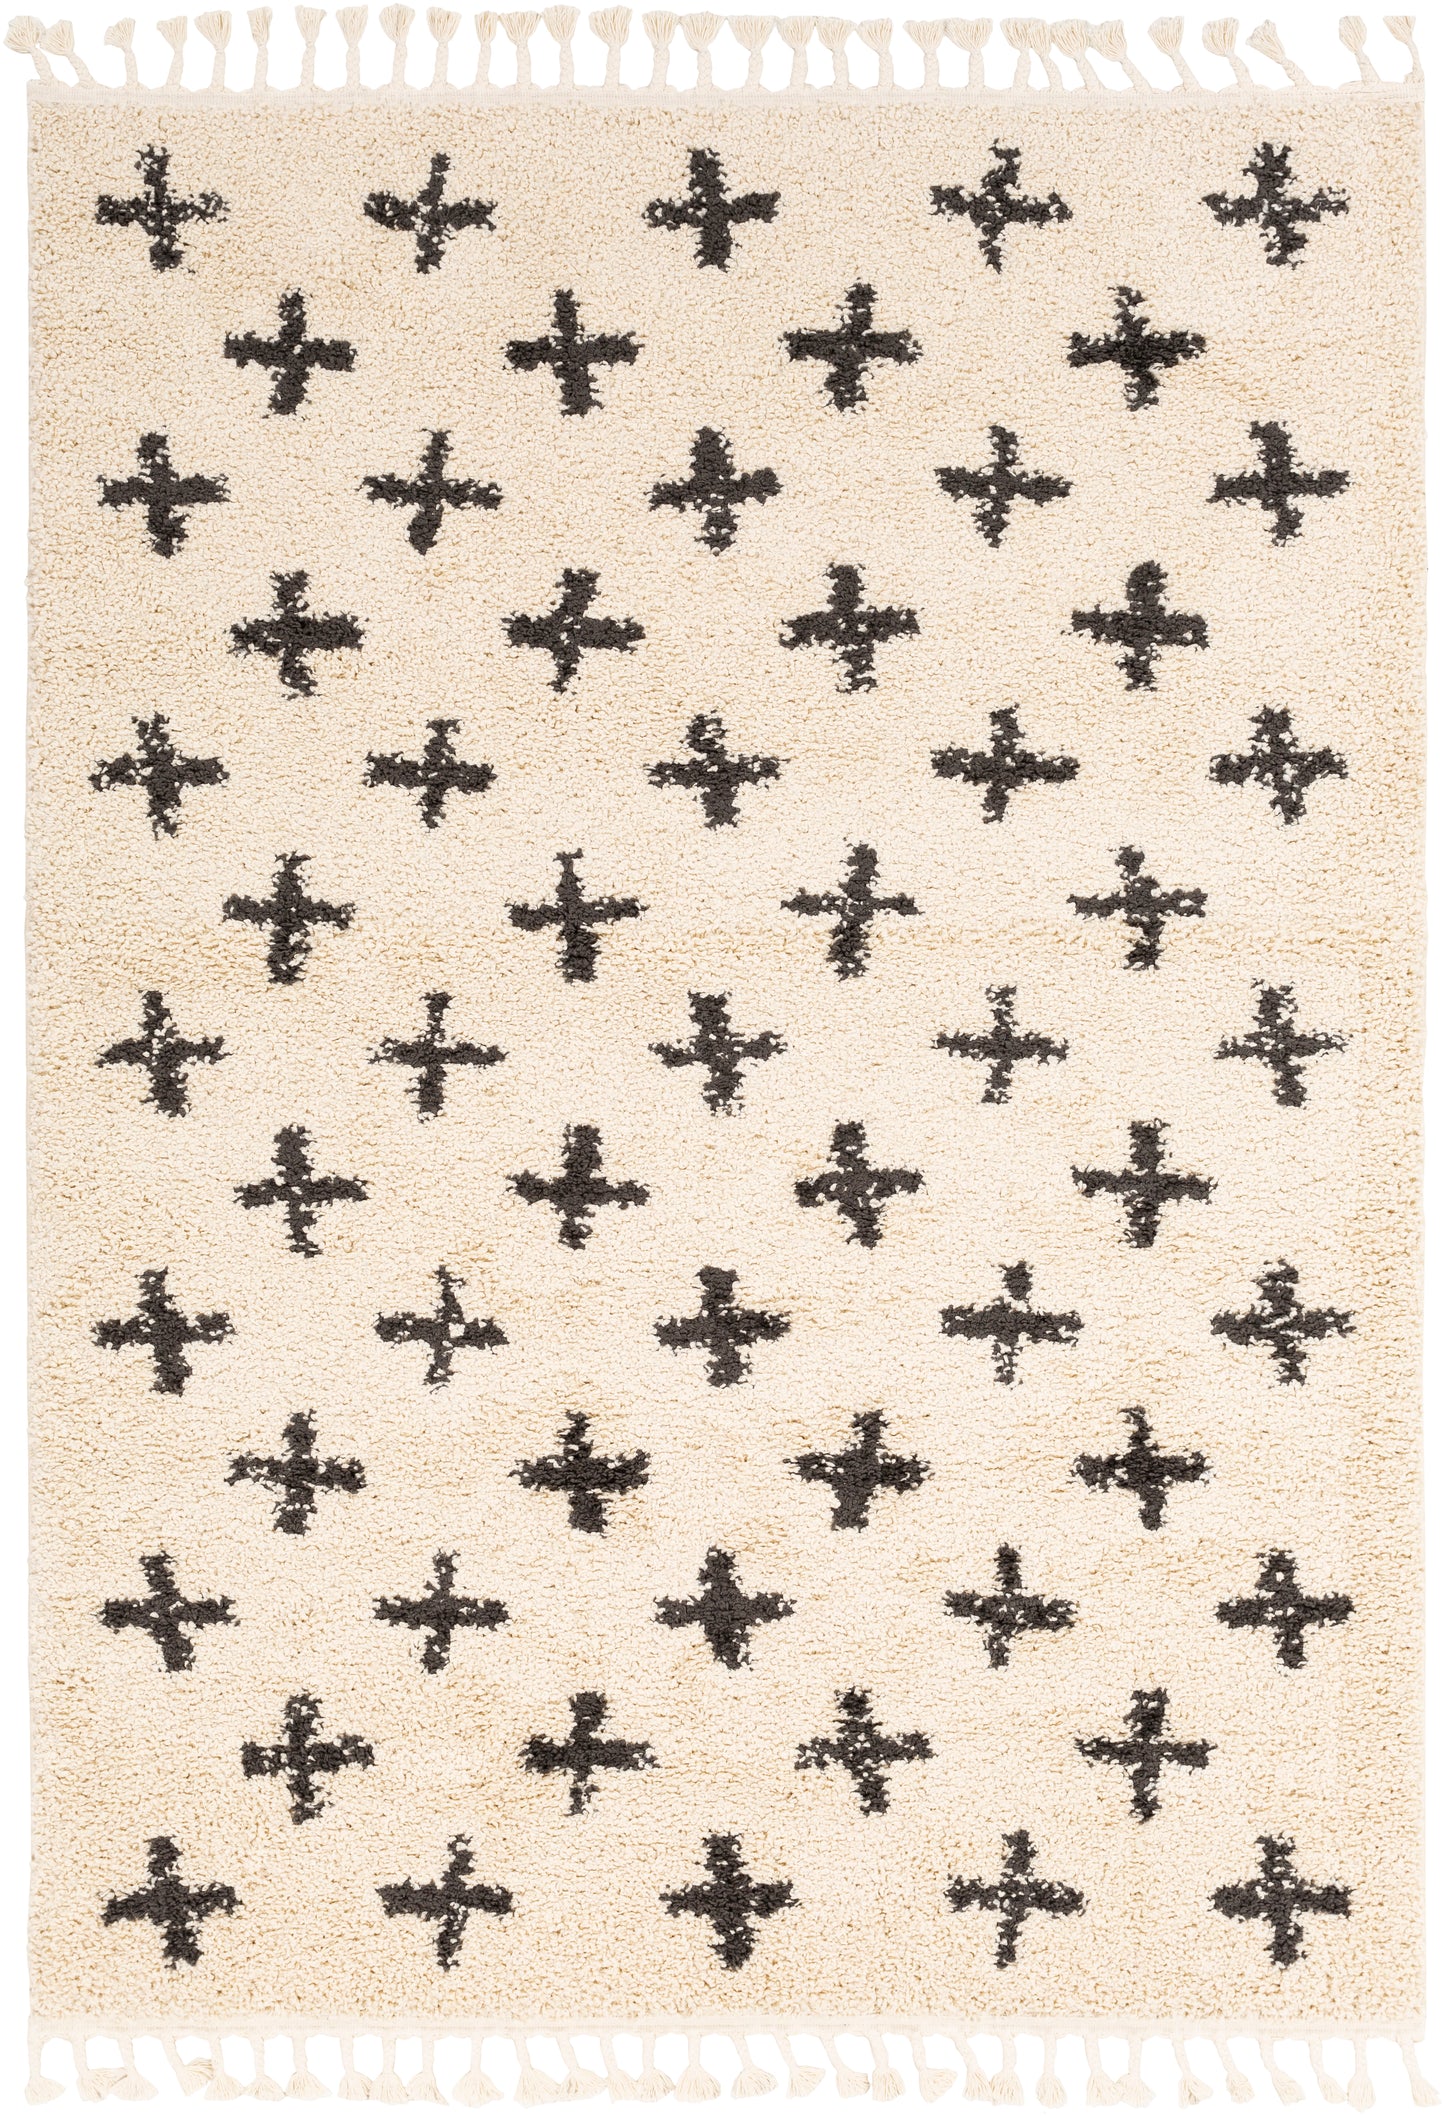 Berber Shag 23382 Machine Woven Synthetic Blend Indoor Area Rug by Surya Rugs